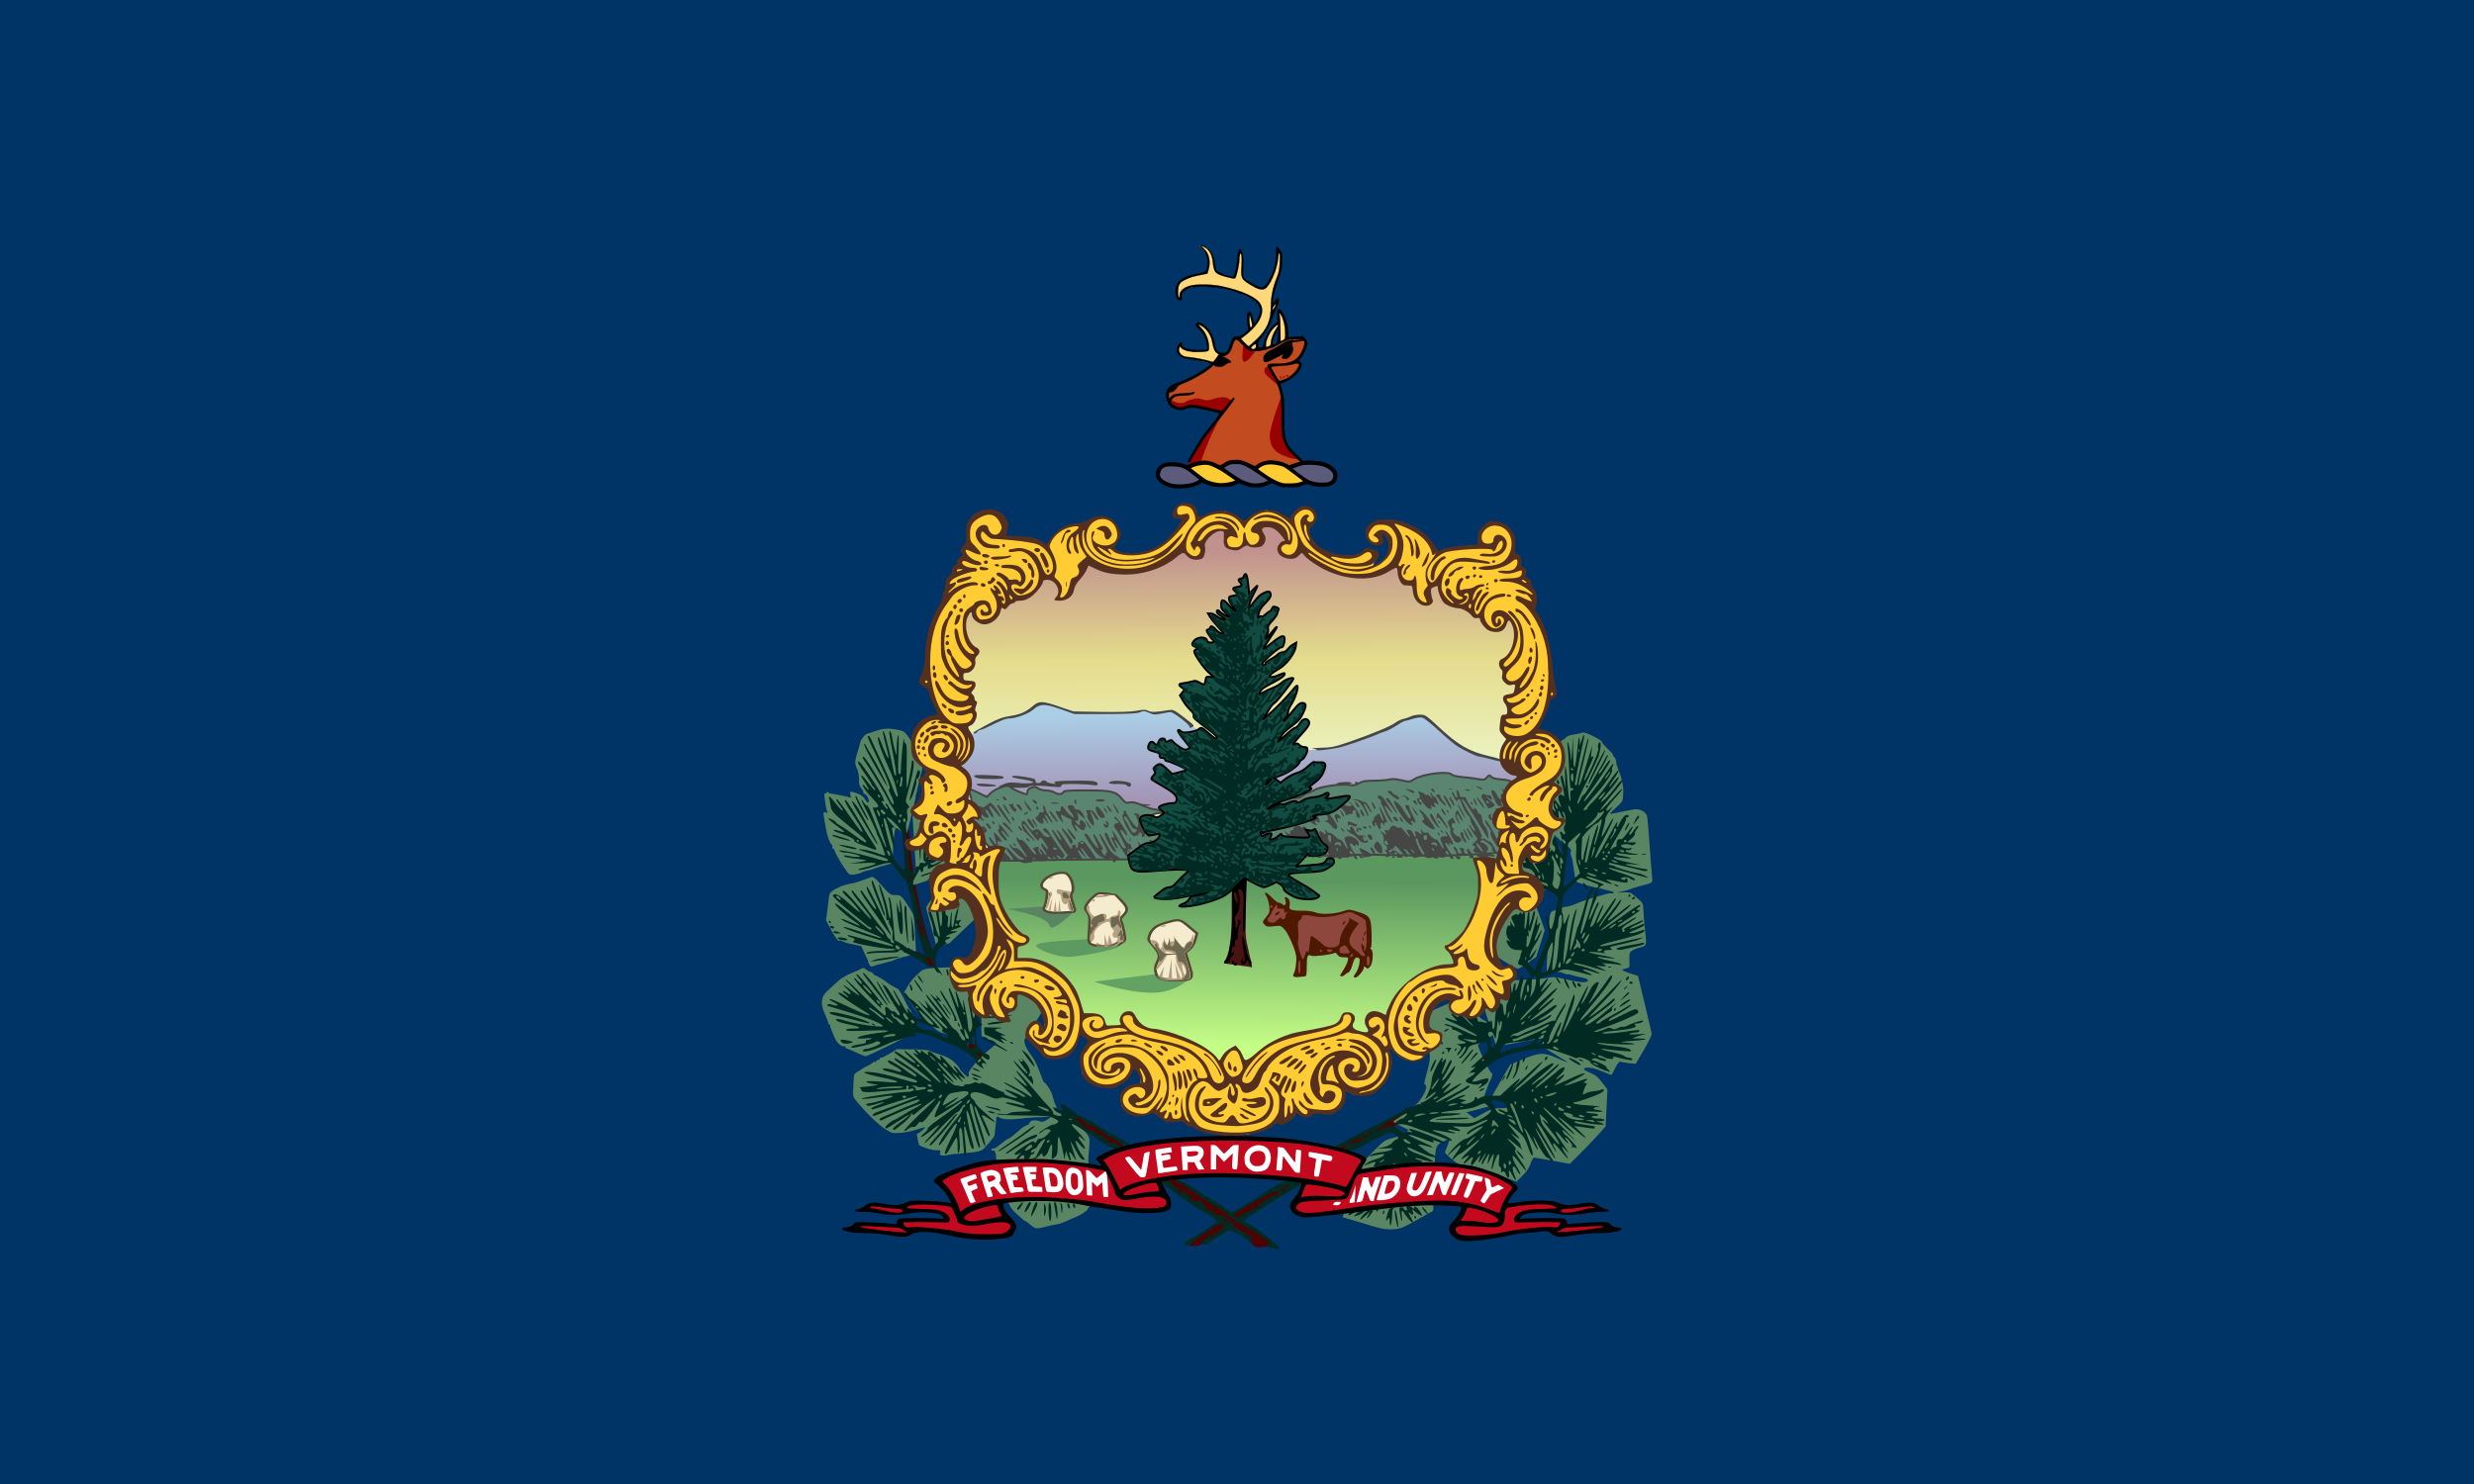 Free Vermont Flag Images: AI, EPS, GIF, JPG, PDF, PNG, SVG and more!